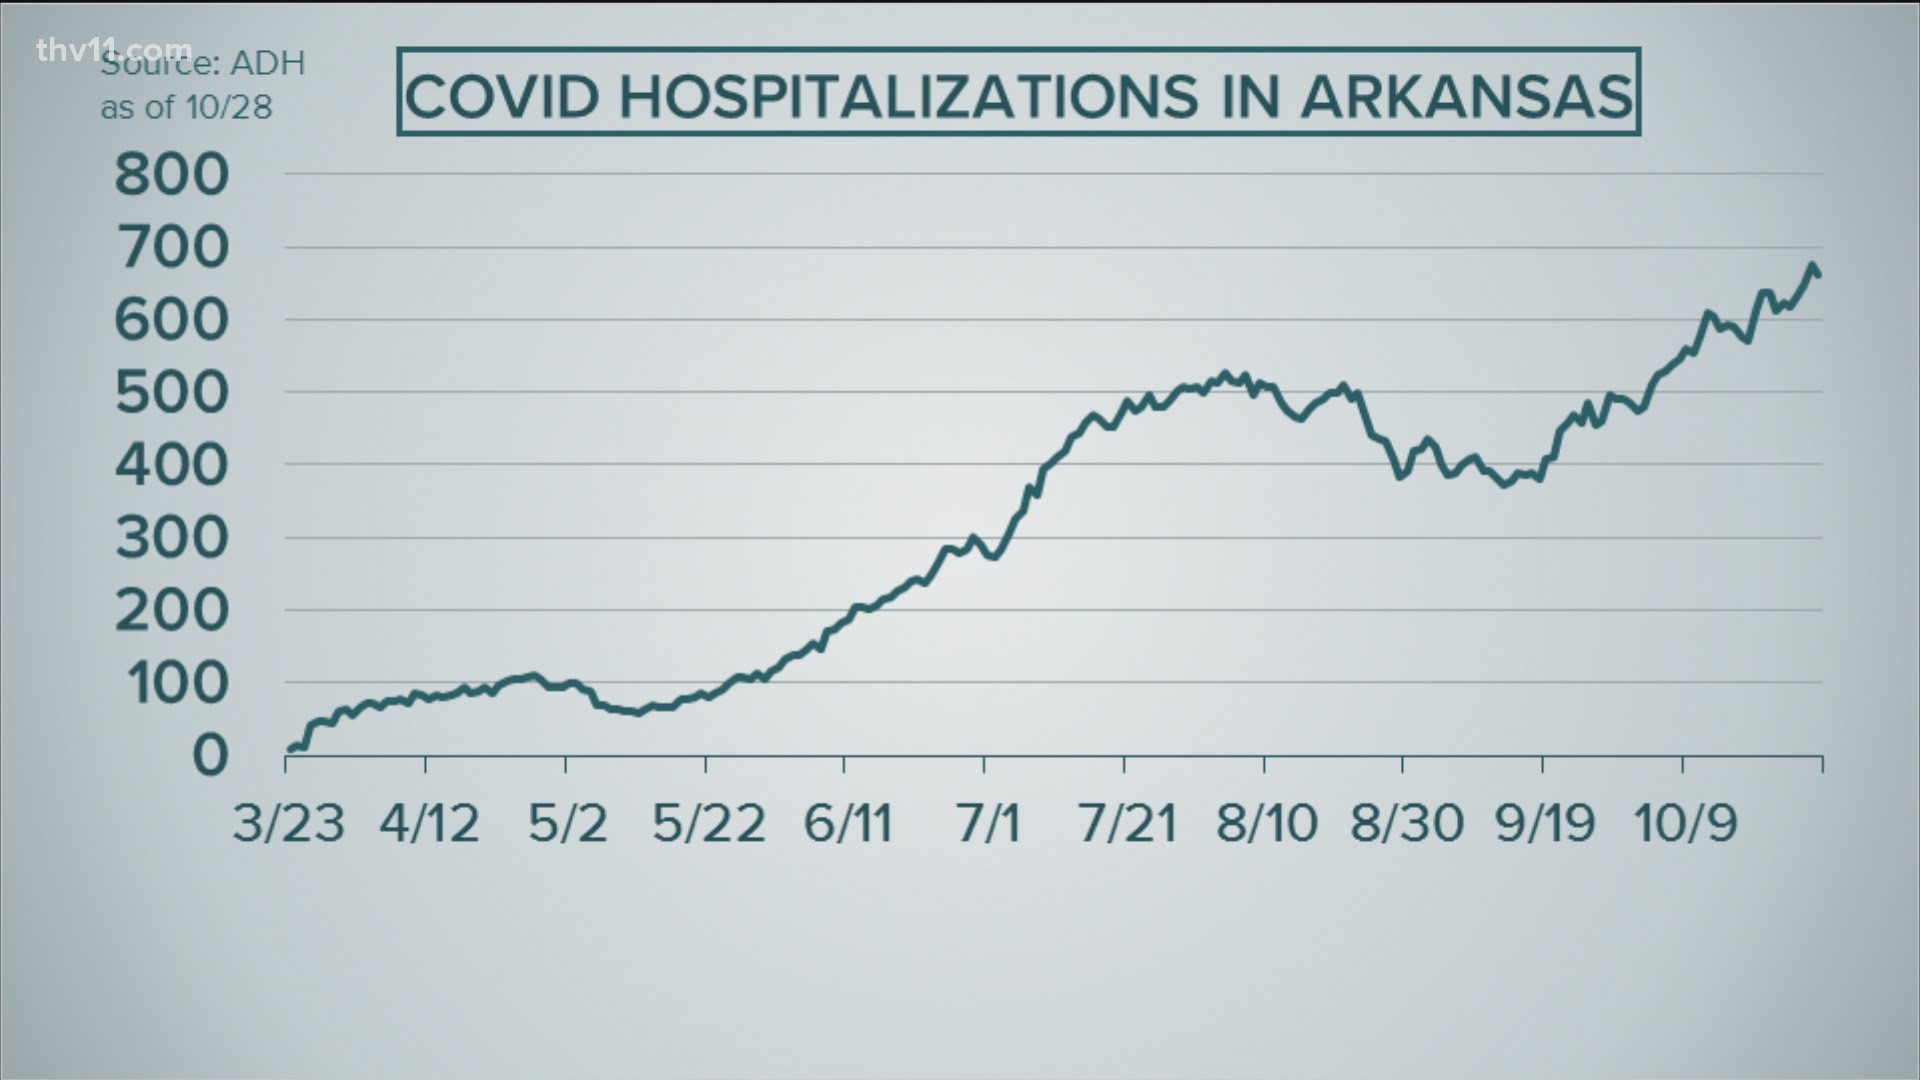 Craig O'Neill provides an update on COVID-19 in Arkansas for Wednesday, October 28.